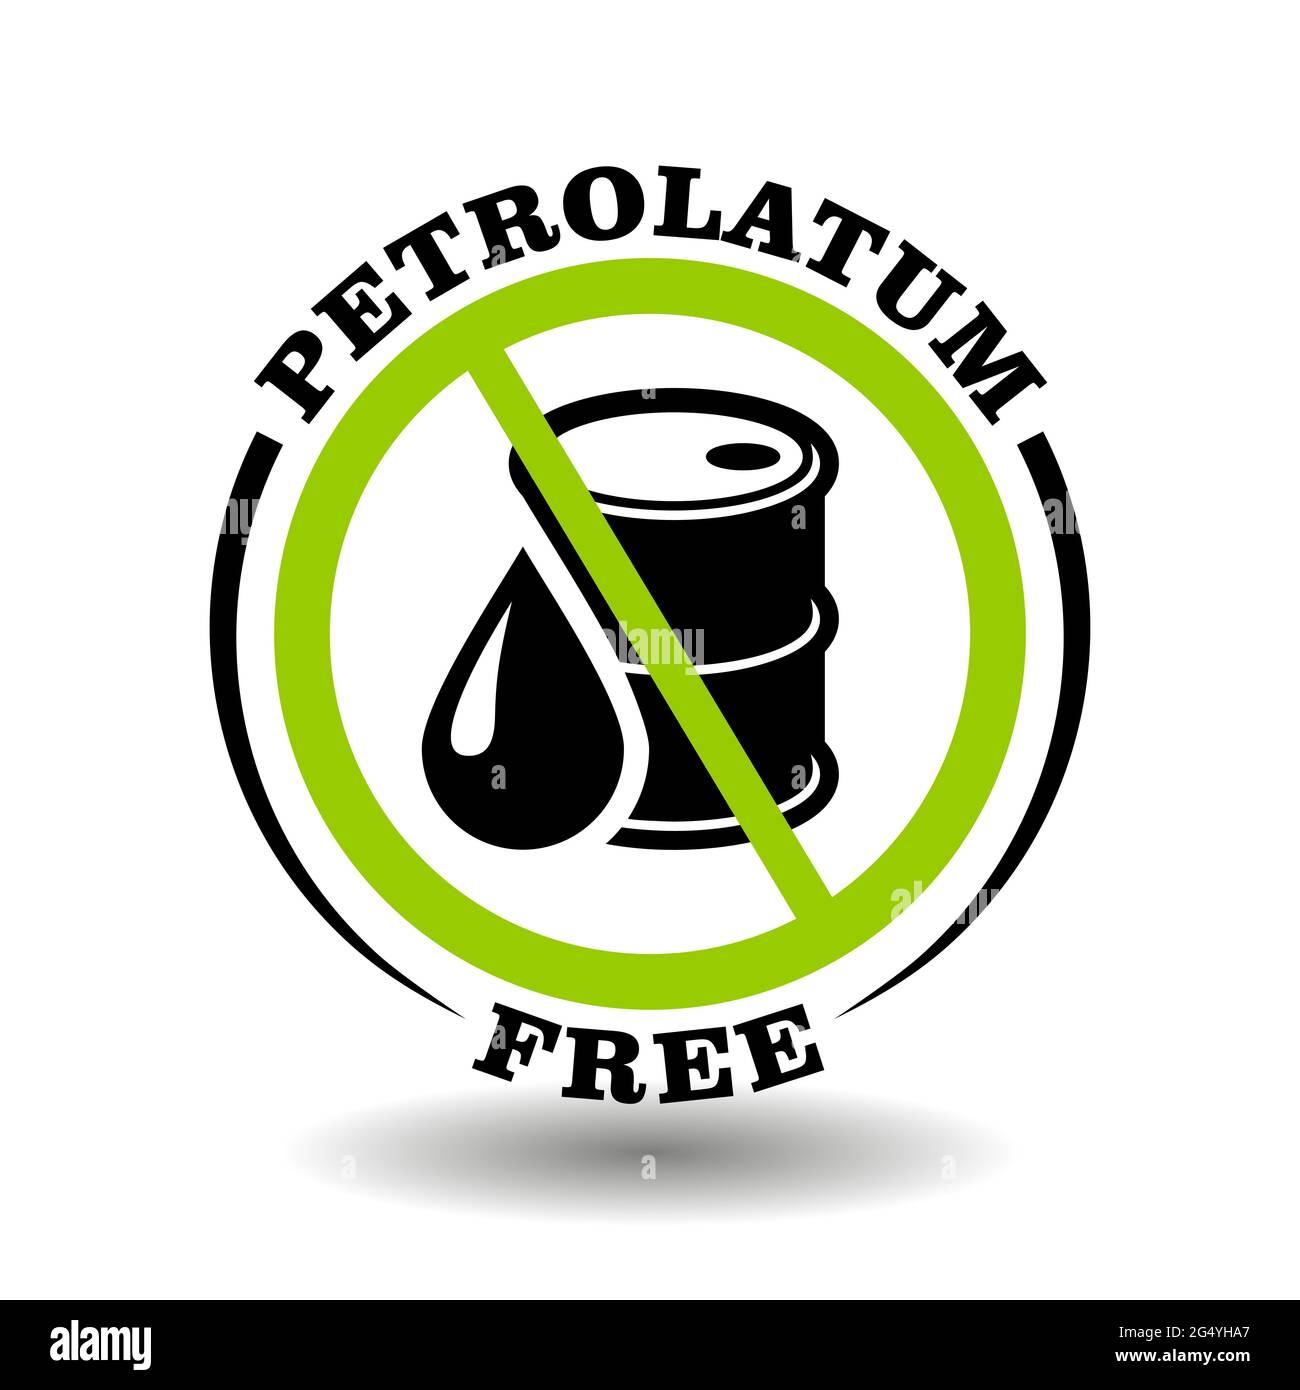 Petrolatum free vector stamp with prohibited petroleum canister drop. Round icon for natural products package, No synthetic oils sign in organic cosme Stock Vector